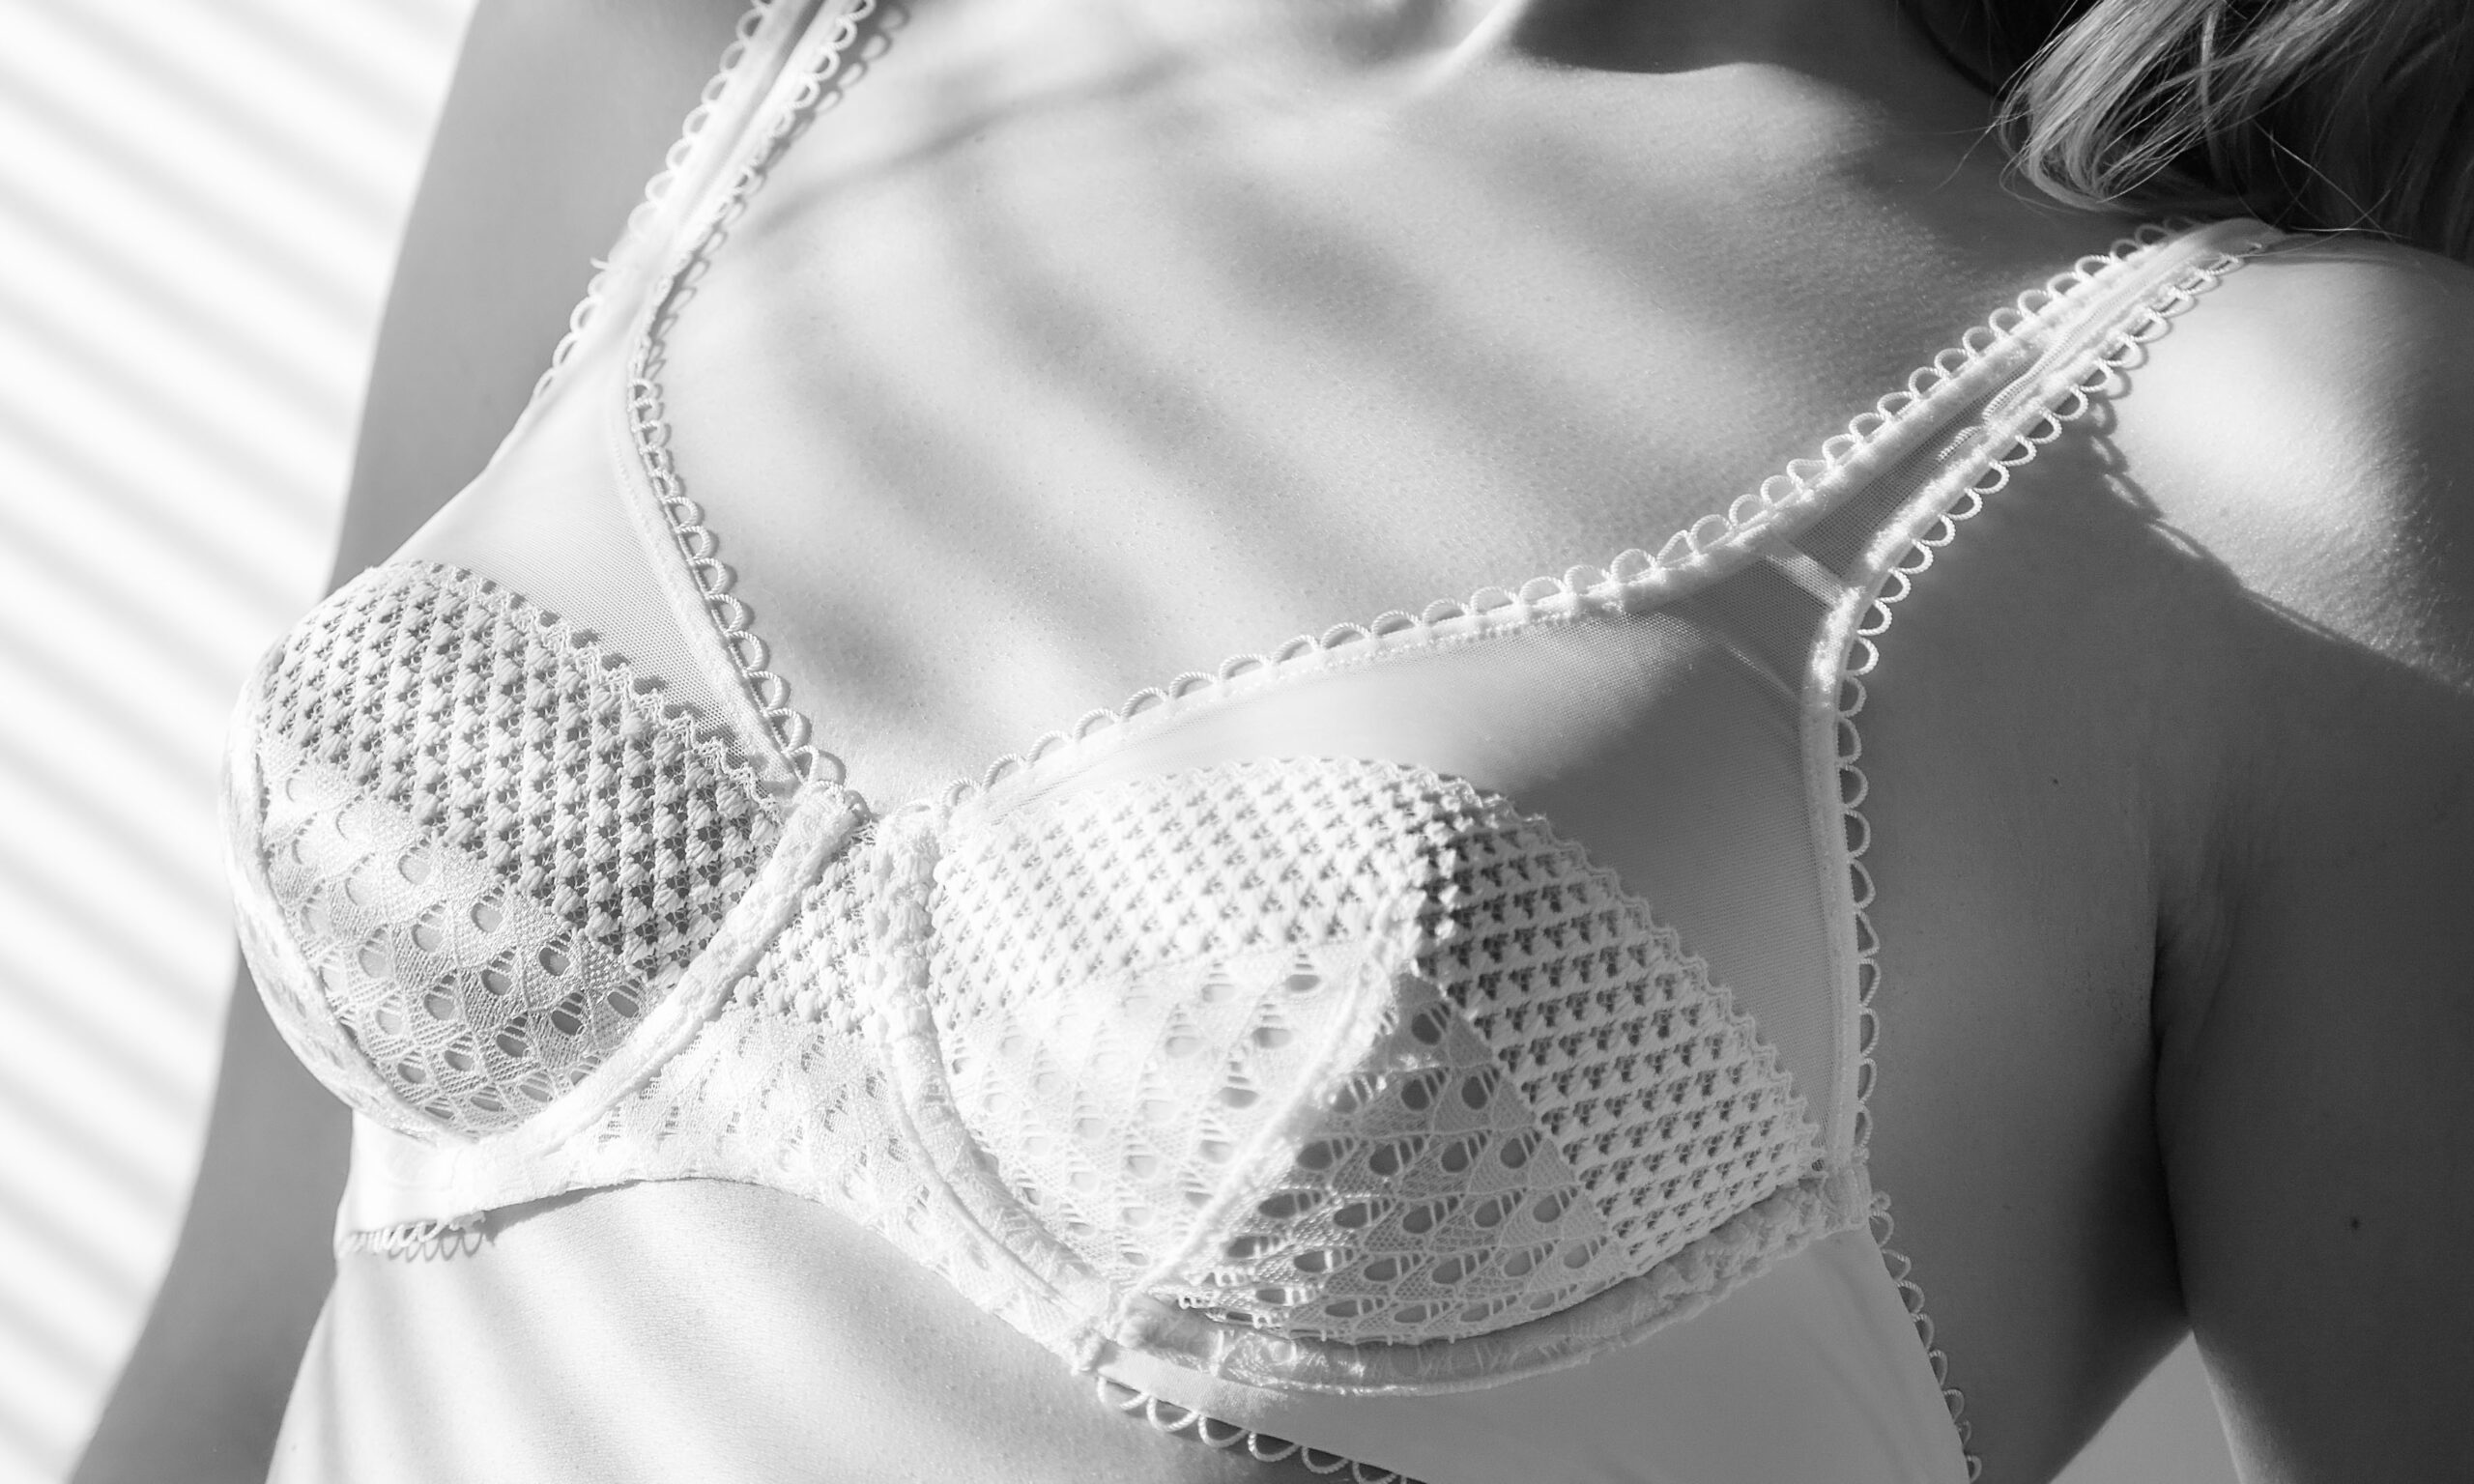 Ten Common Questions about Breast Augmentation Answered - Vegas Liposuction